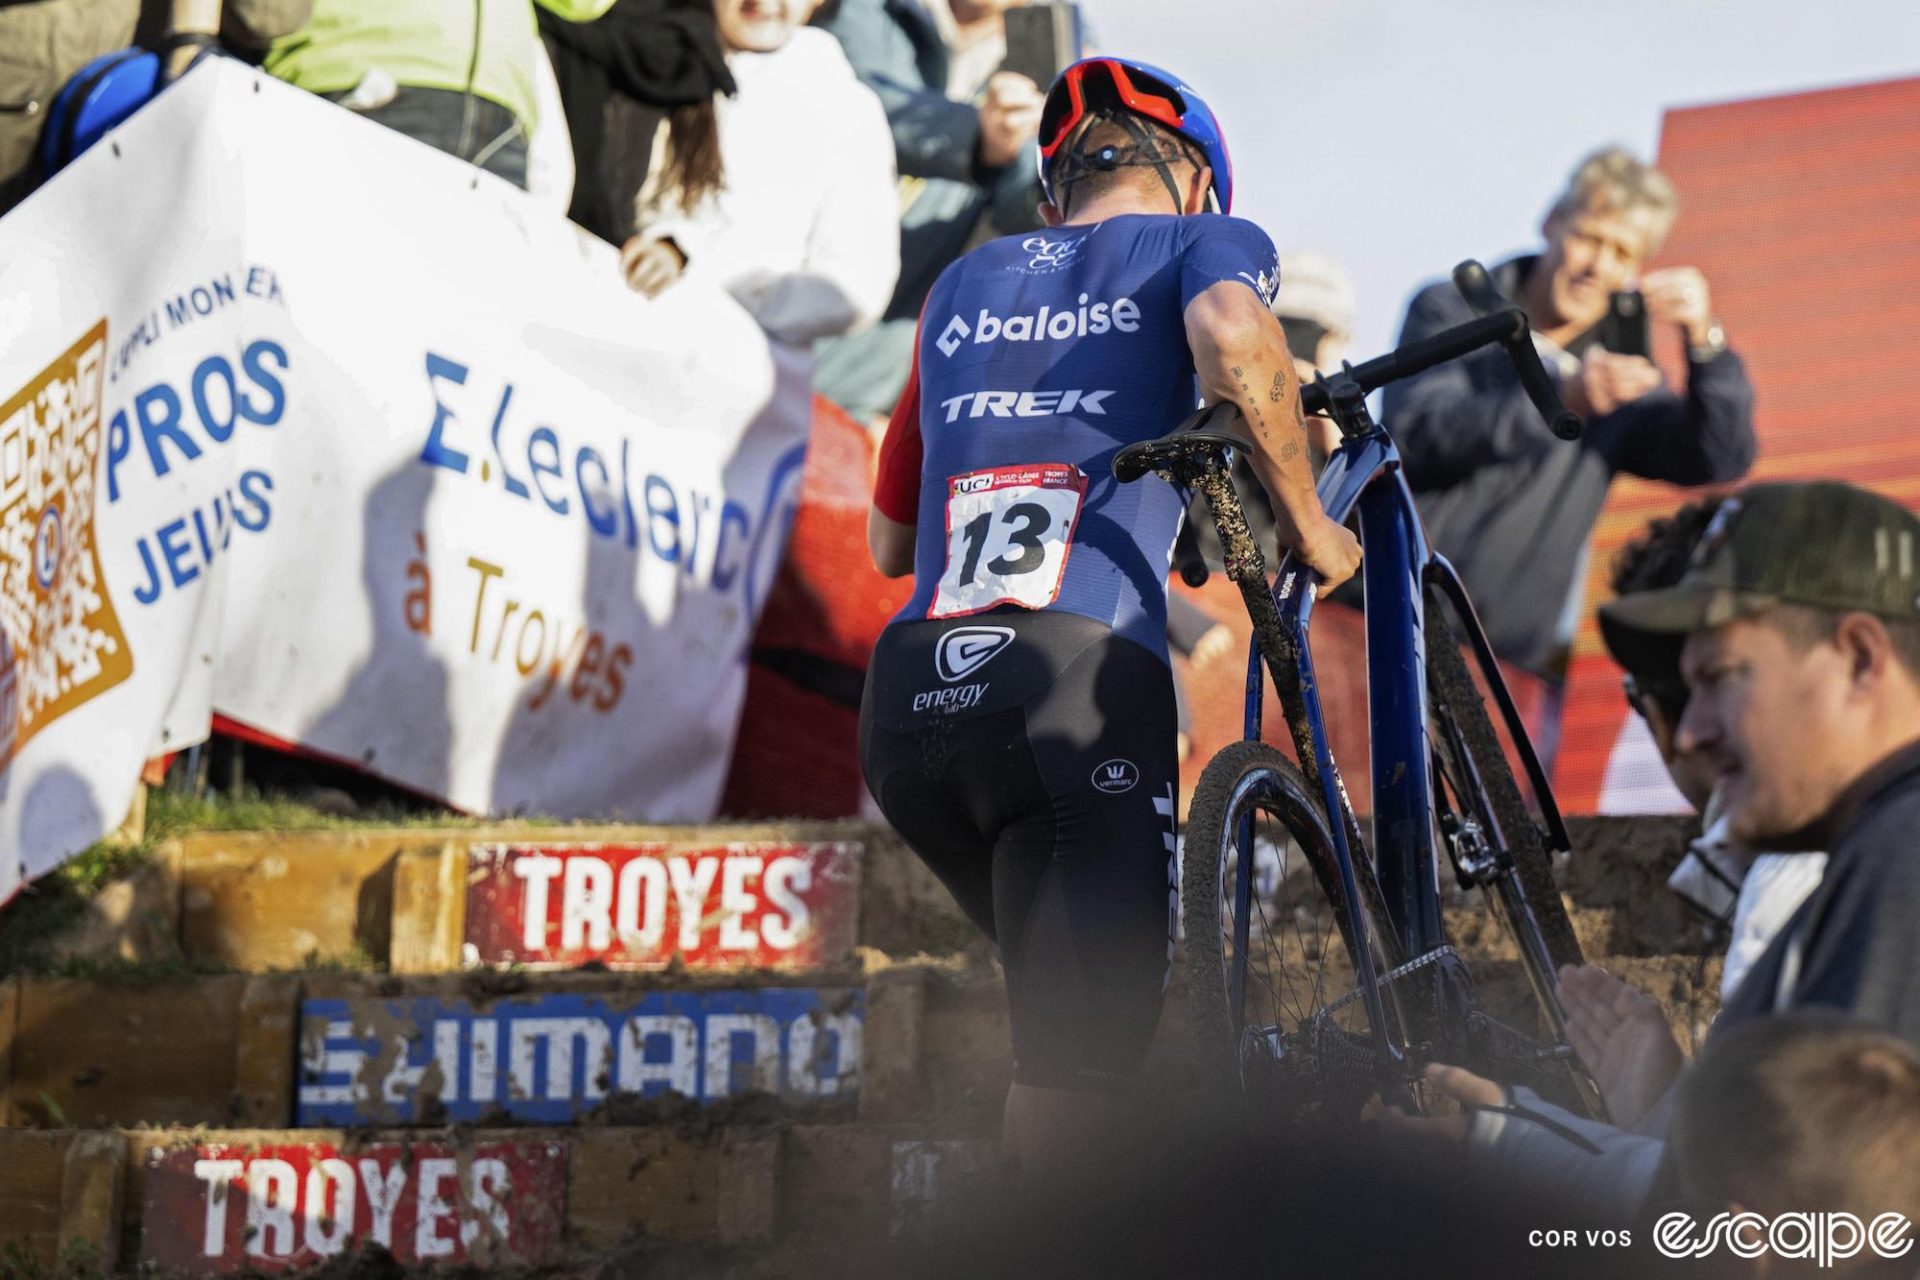 Thibau Nys suitcases his bike up the stairs at Troyes. He's shown from behind, with bib number 13.